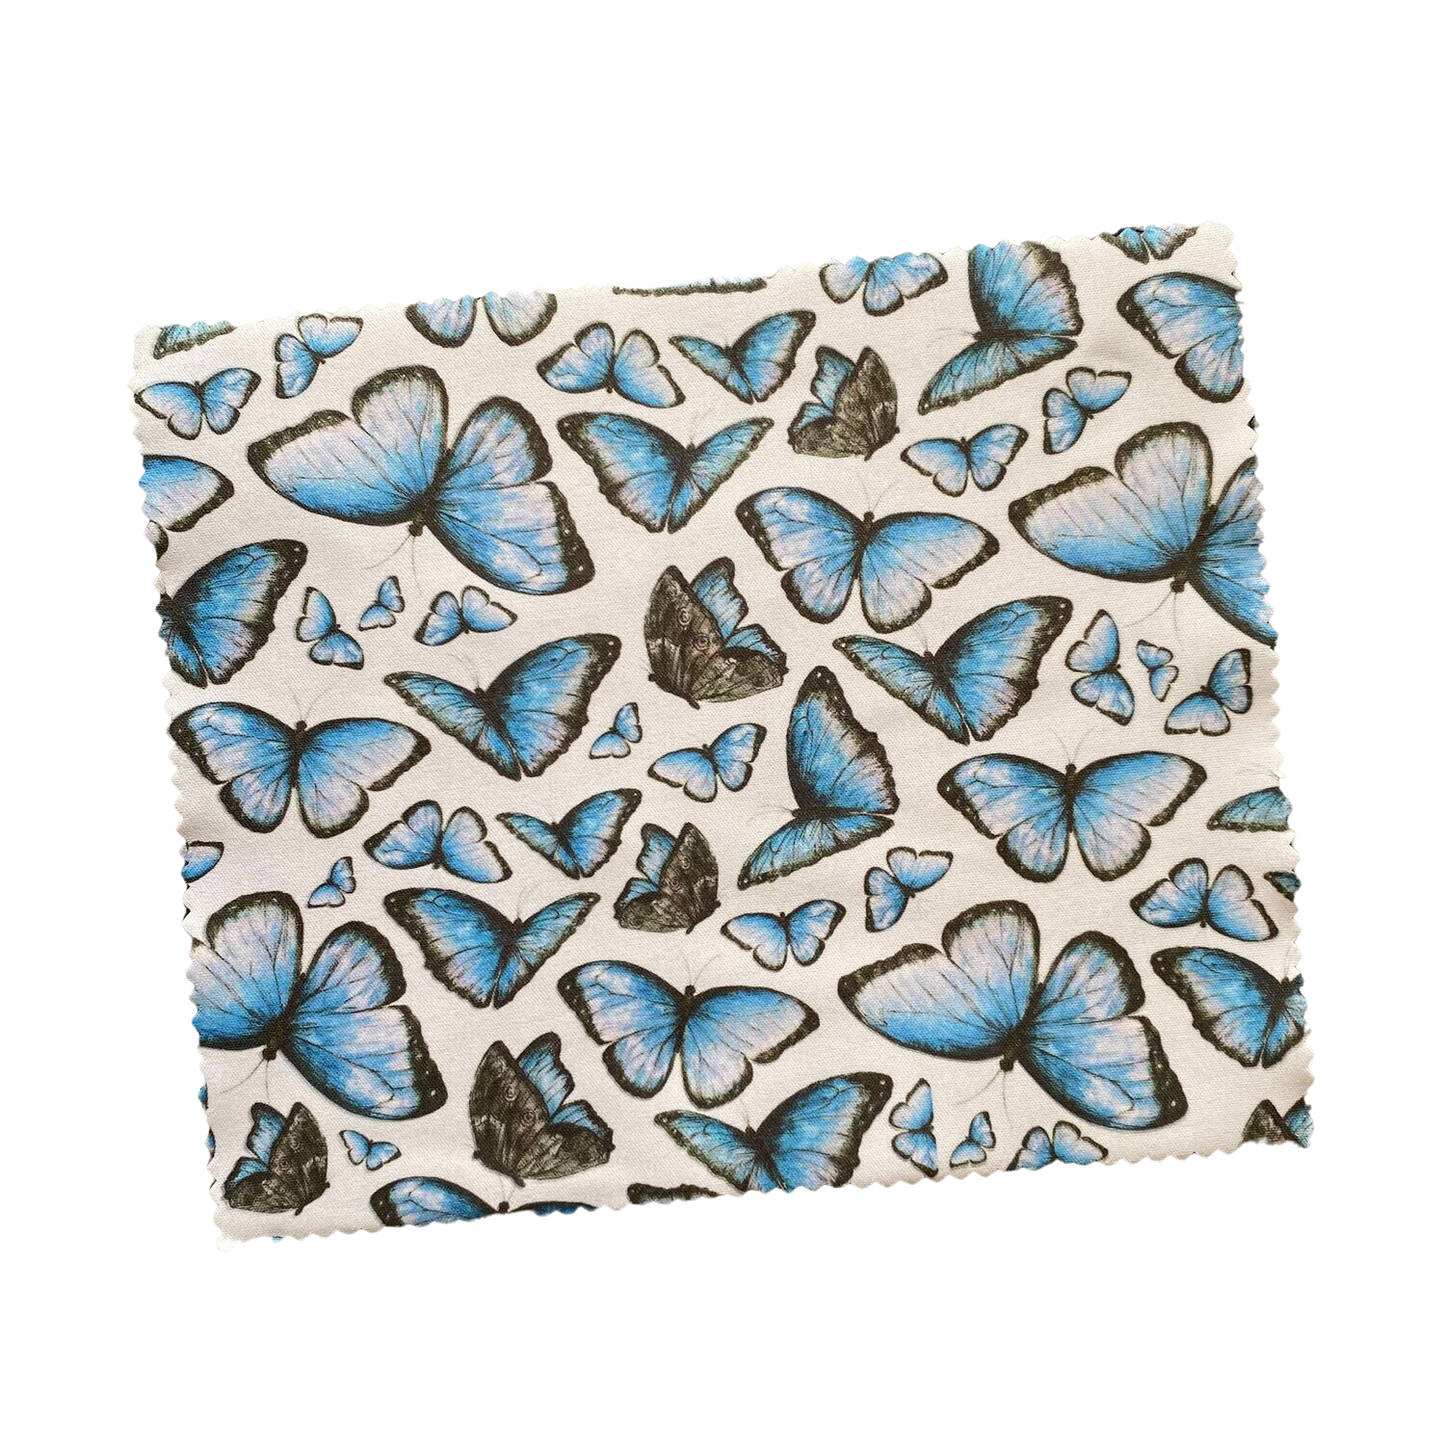 Butterfly Lens Cloth